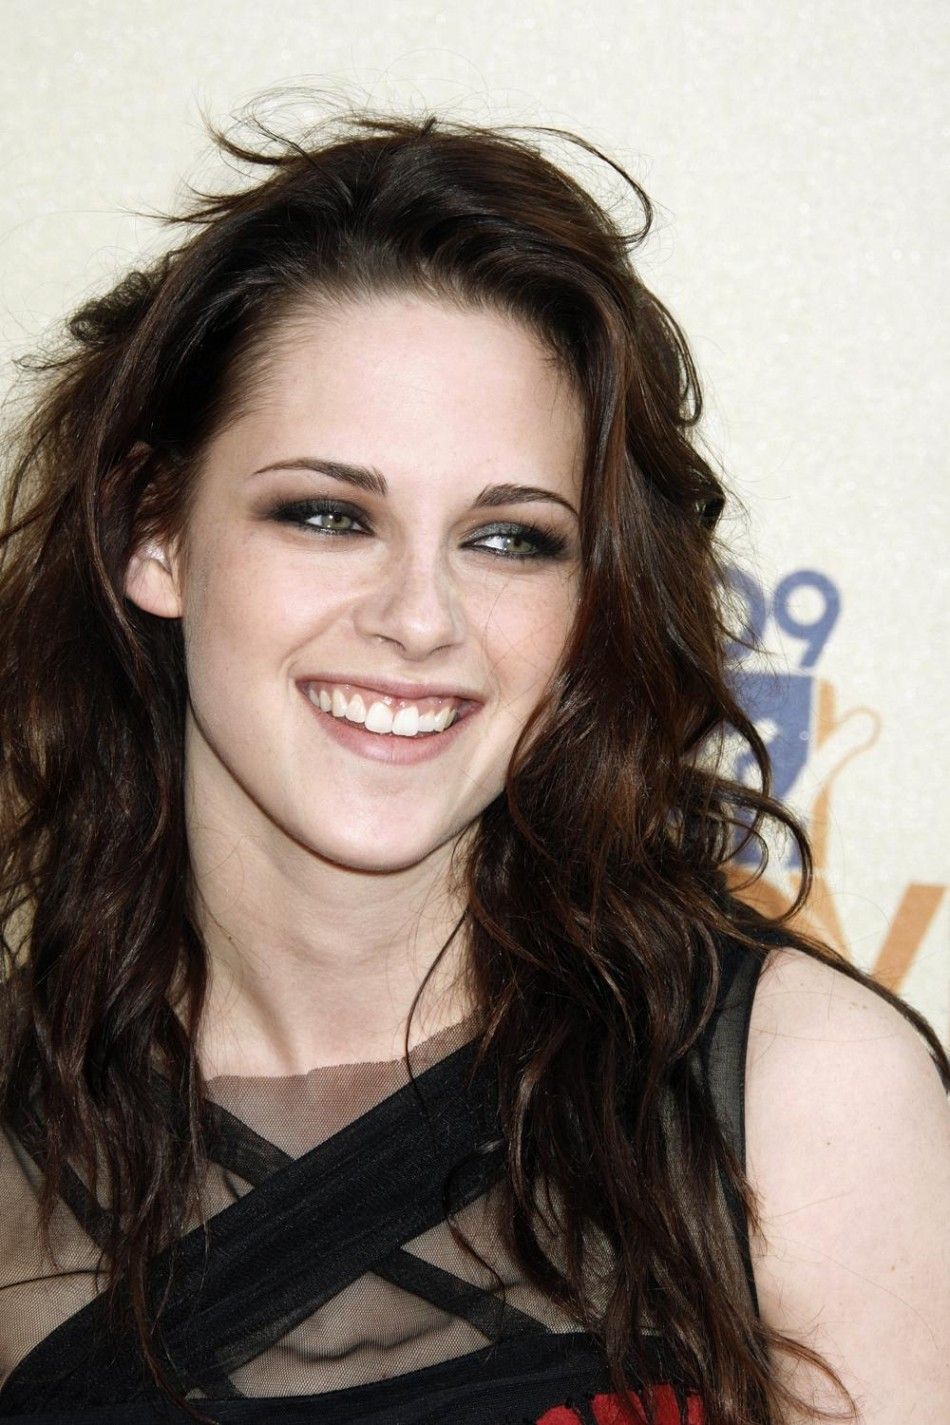 The star of the film quotTwilightquot Kristen Stewart at the 2009 MTV Movie Awards in Los Angeles.